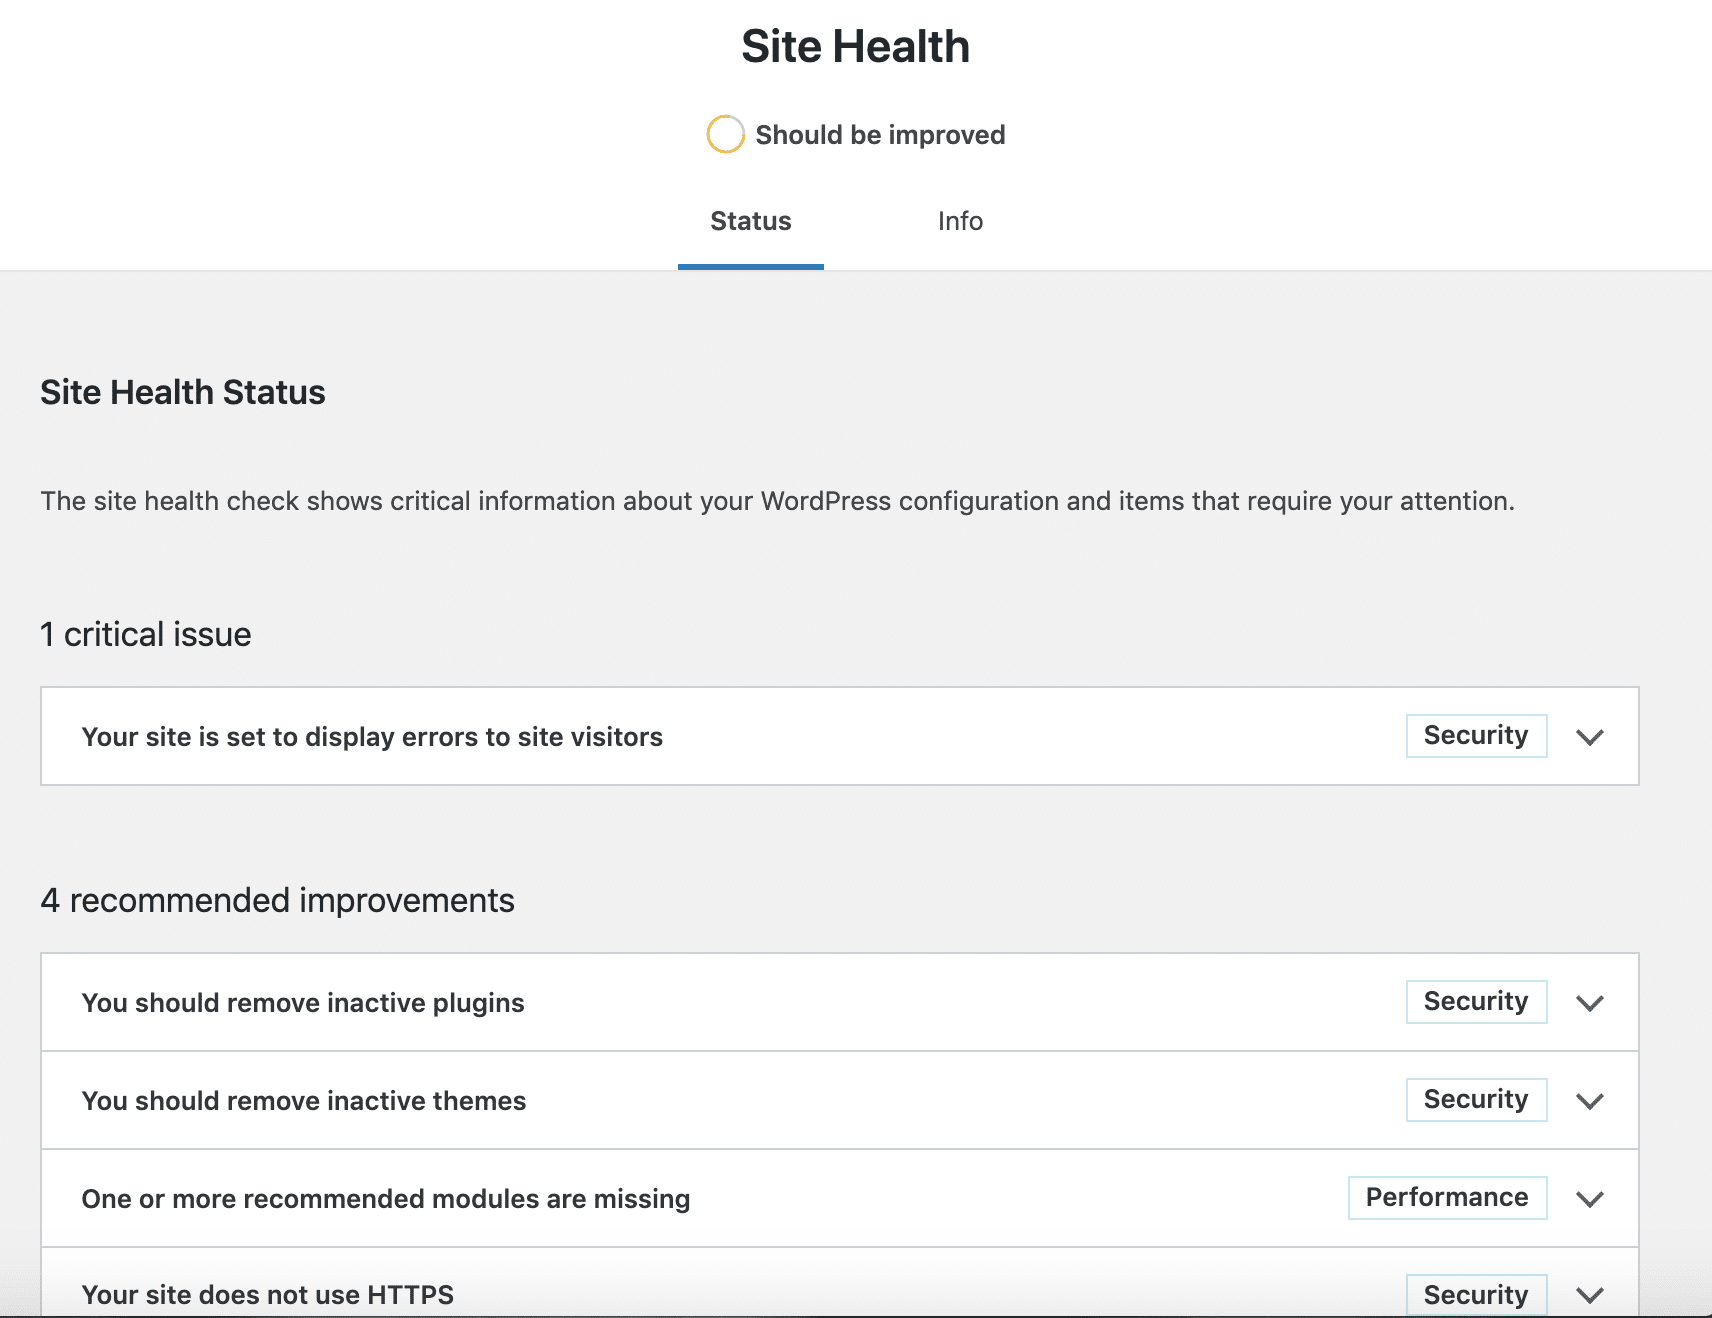 Site Health Status page in WordPress 5.3